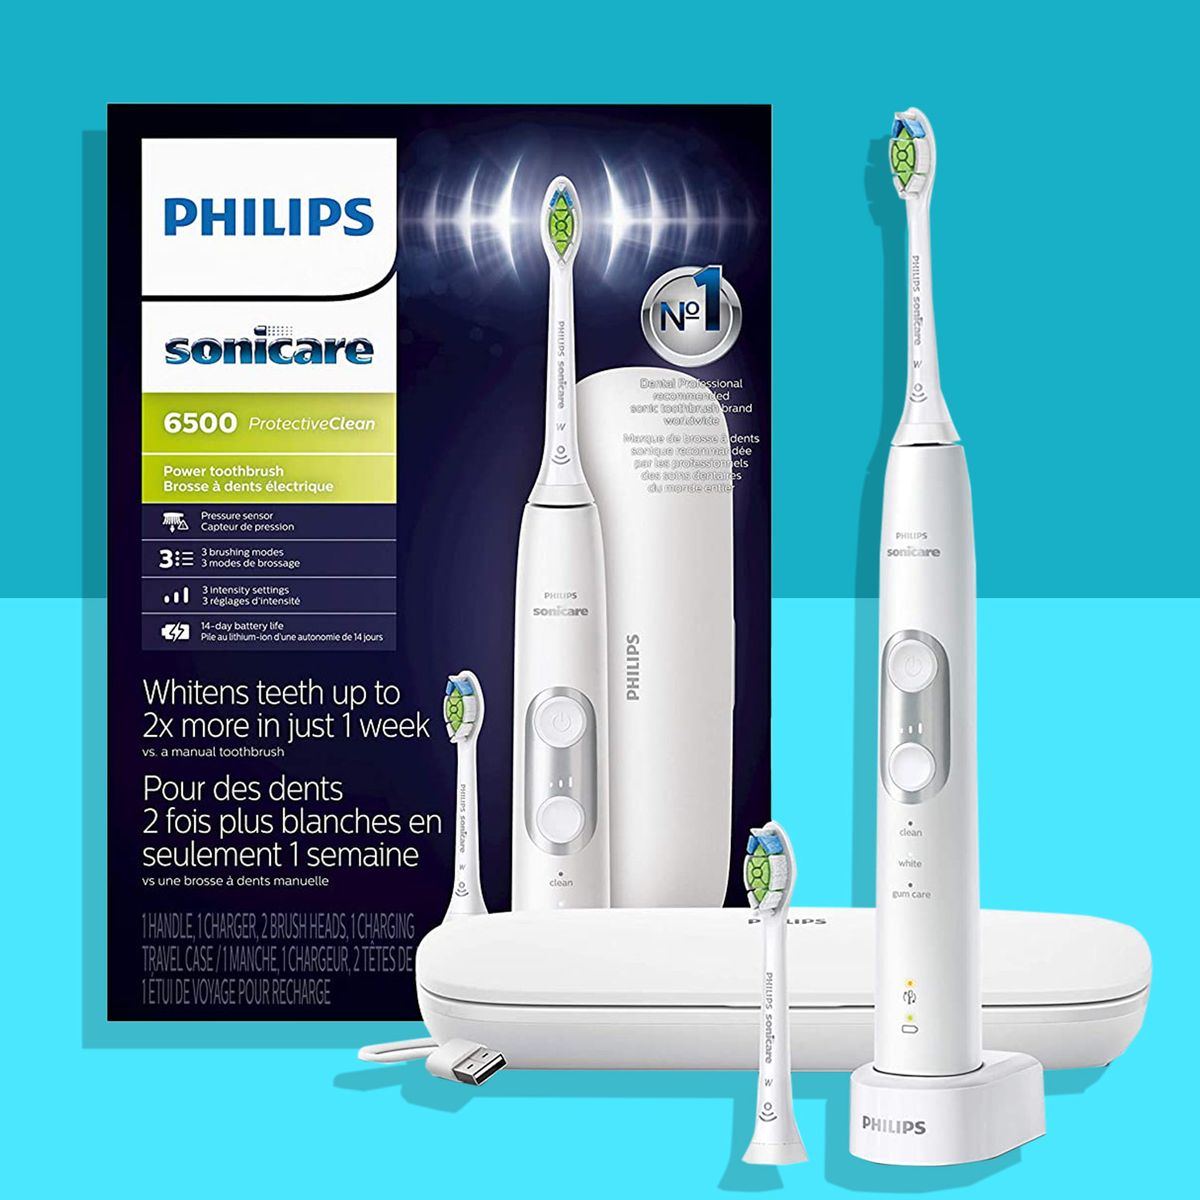 Philips Sonicare ProtectiveClean Electric Toothbrush Sale | The Strategist